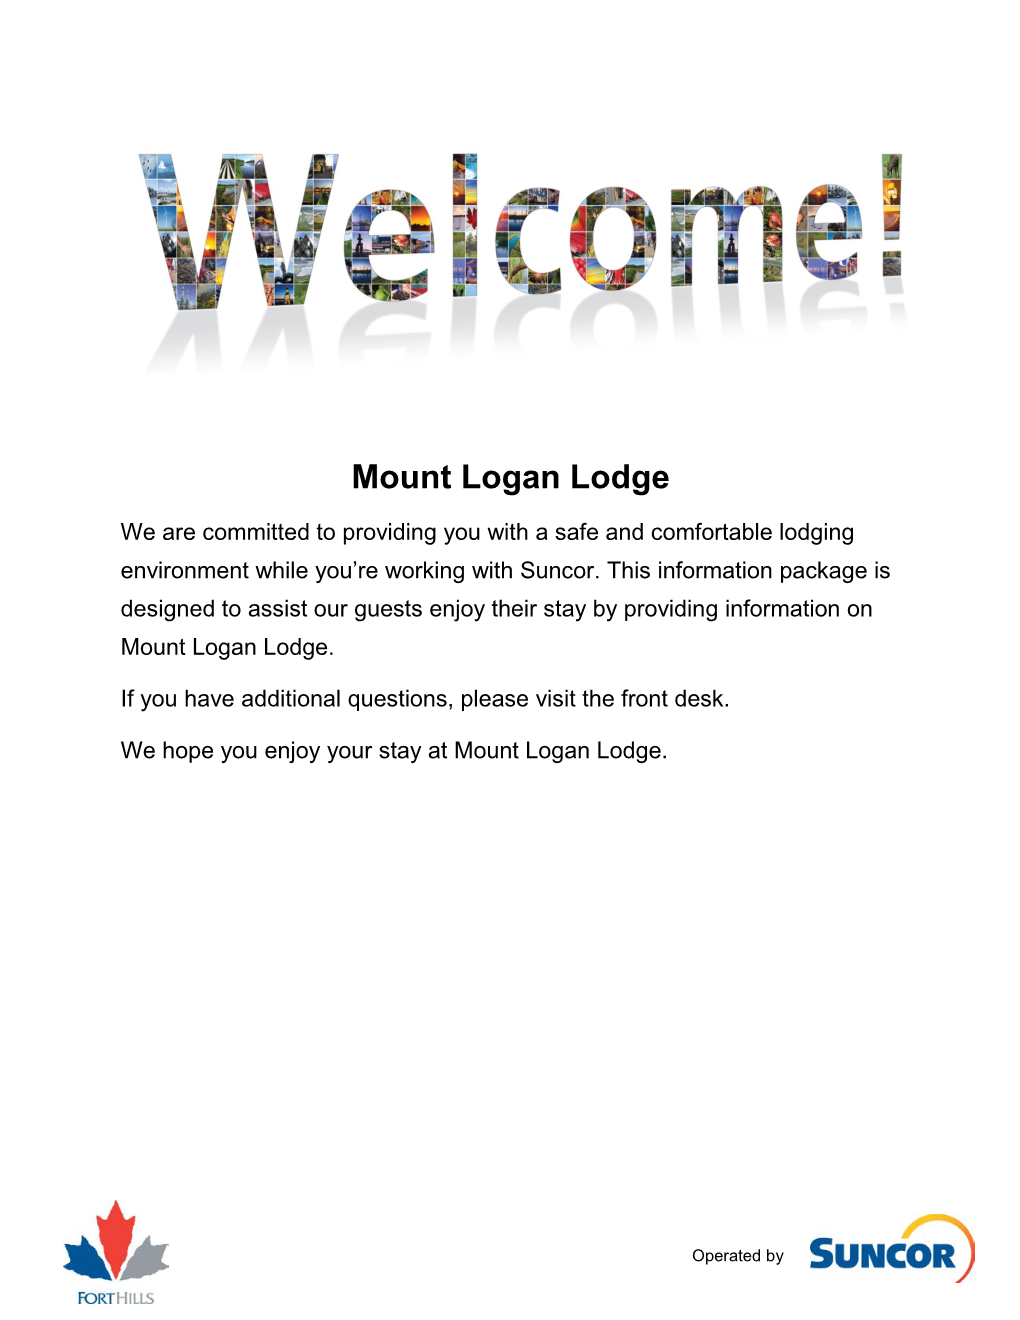 Mount Logan Lodge We Are Committed to Providing You with a Safe and Comfortable Lodging Environment While You’Re Working with Suncor